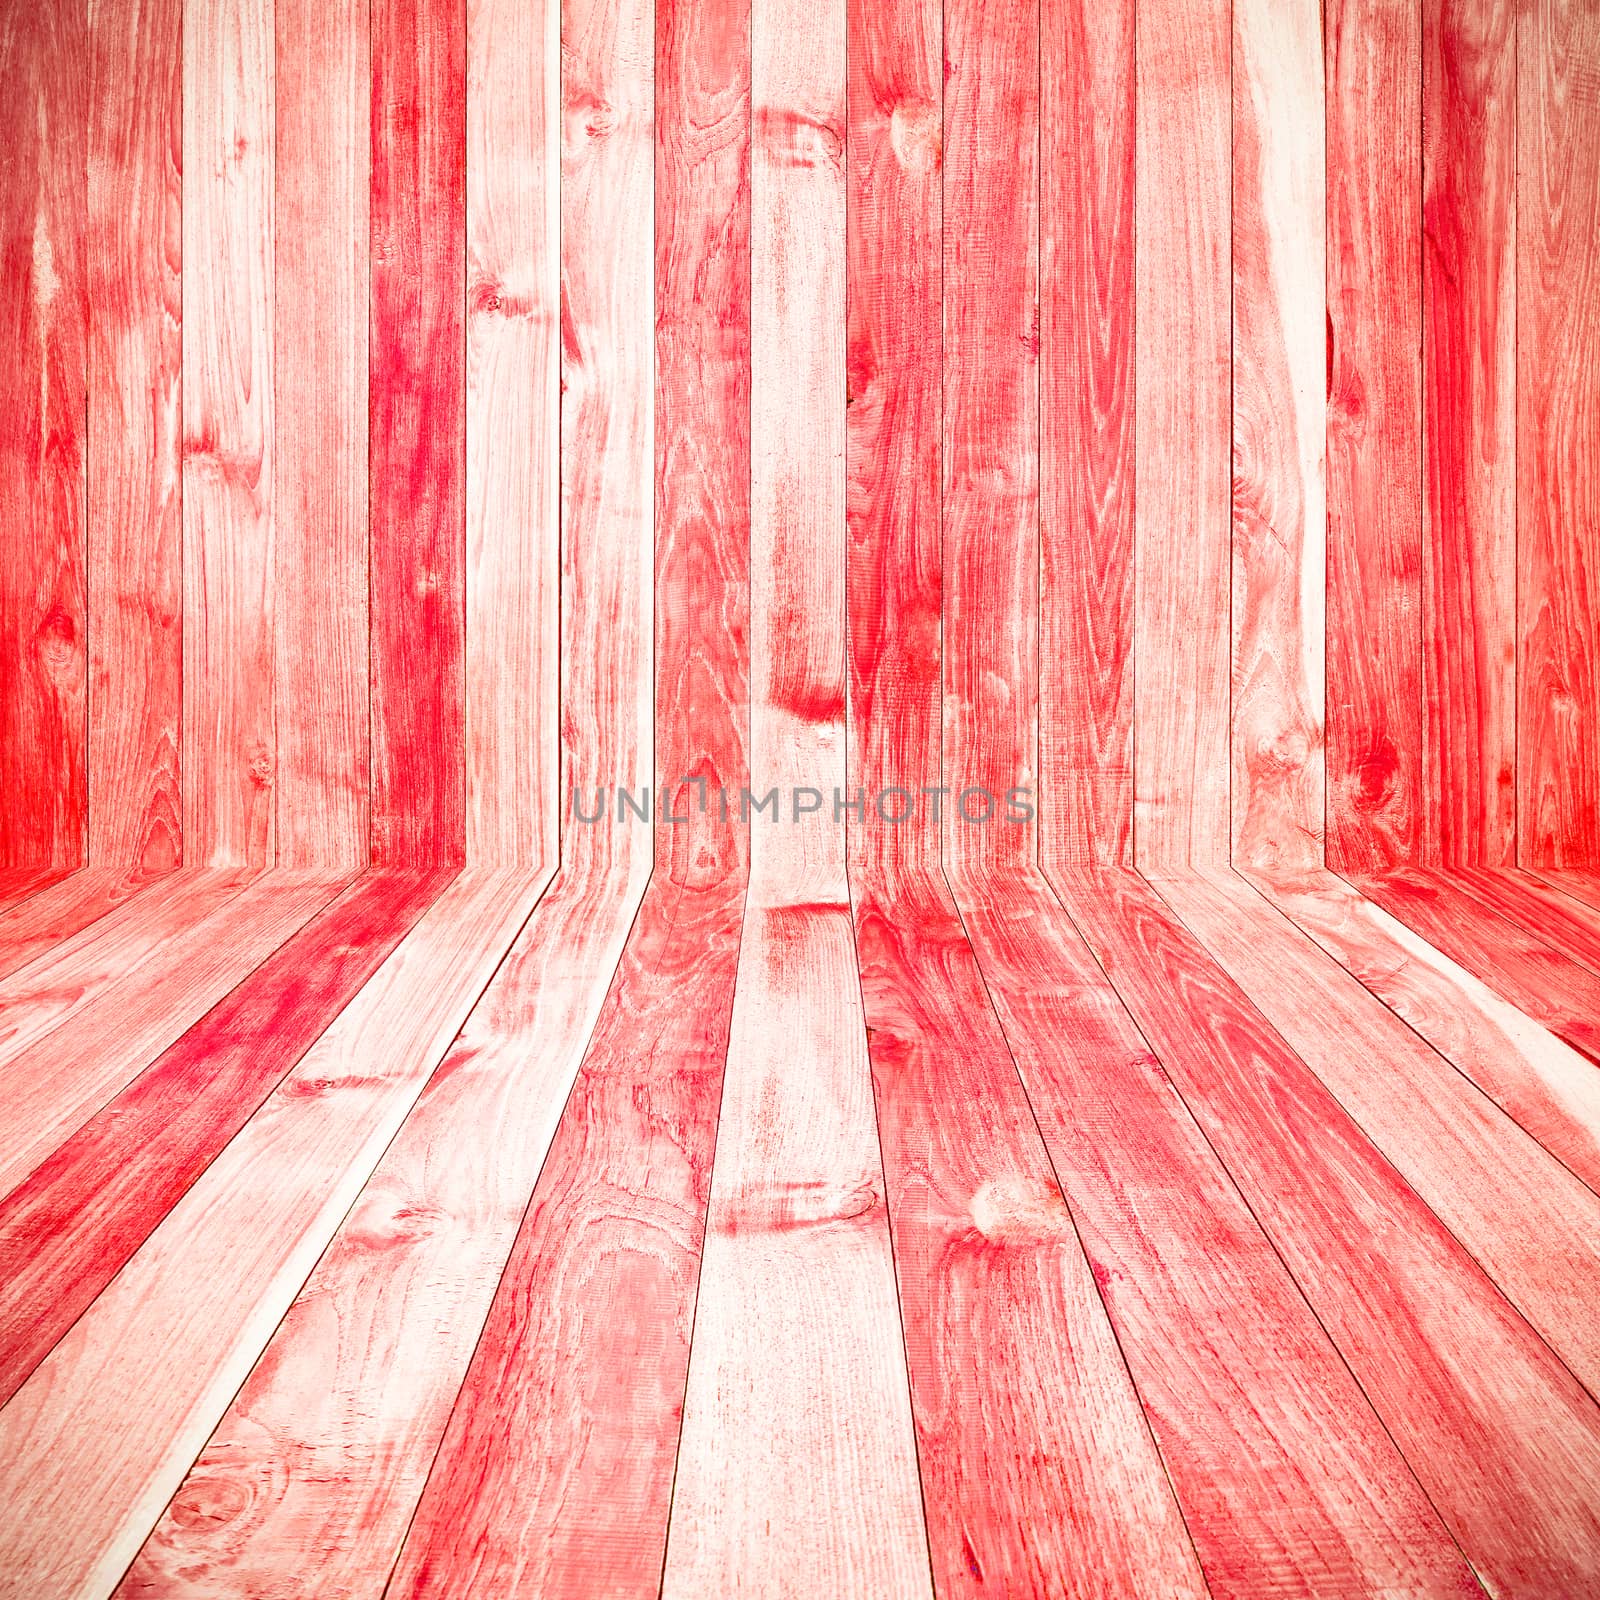 high resolution vintage red wood texture background by nopparats